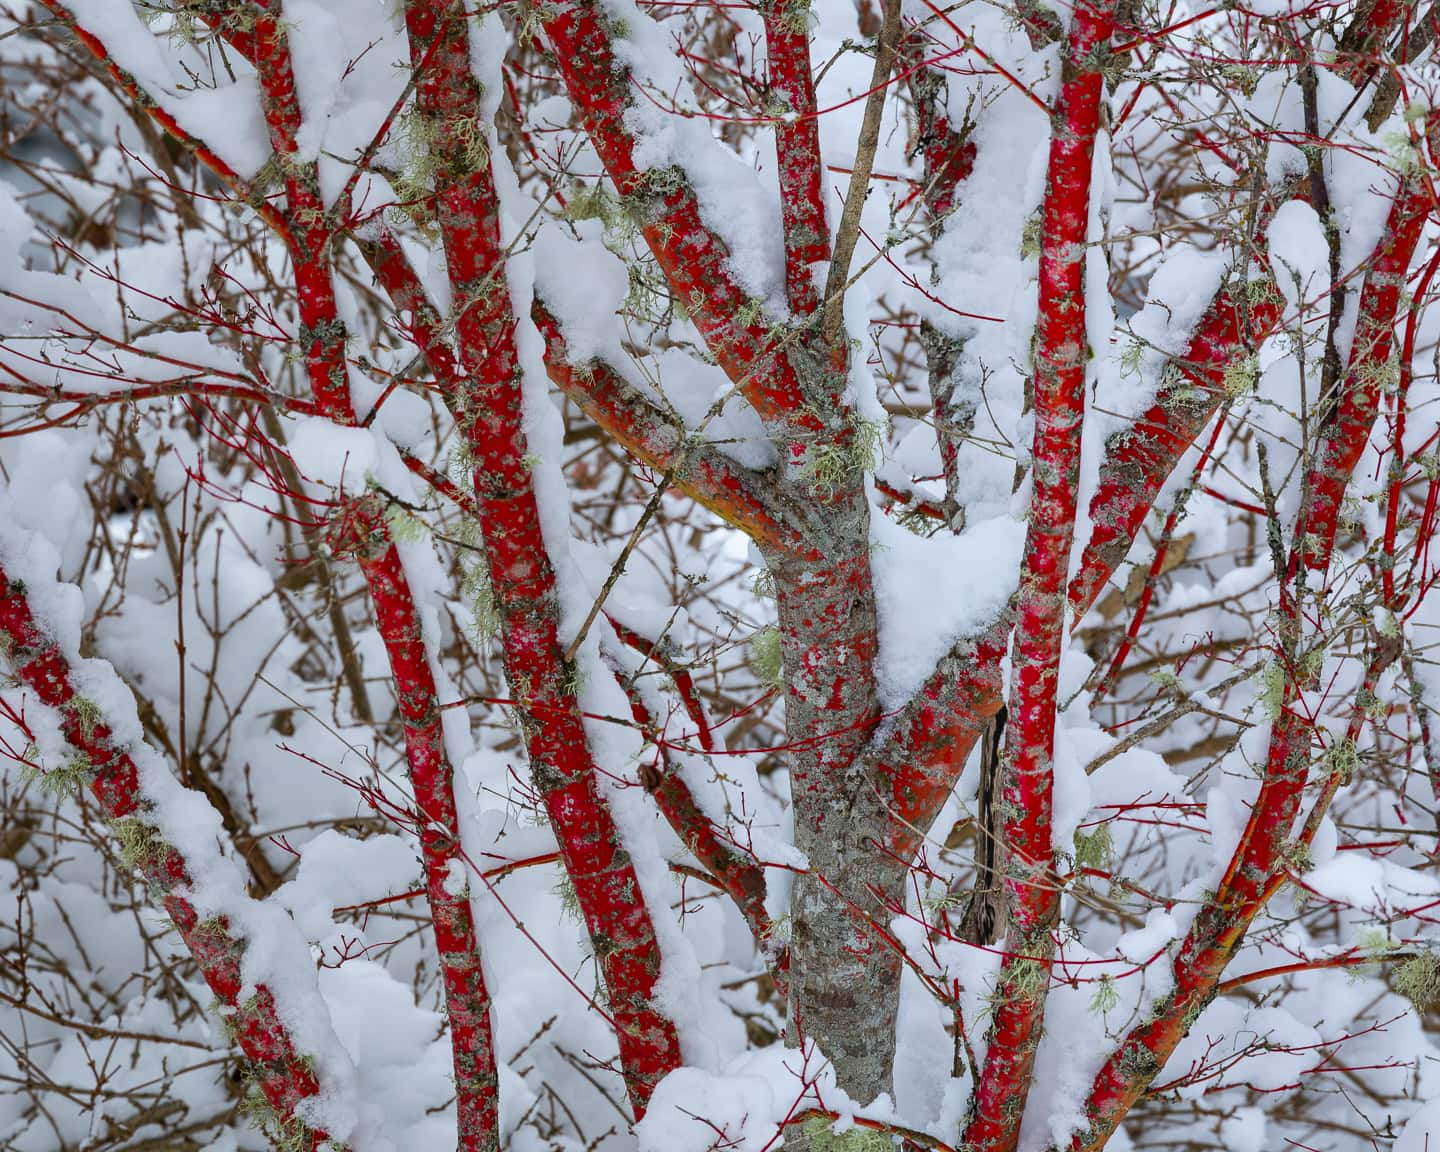 A 'Coral Bark' Japanese maple tree with red branches covered in snow.